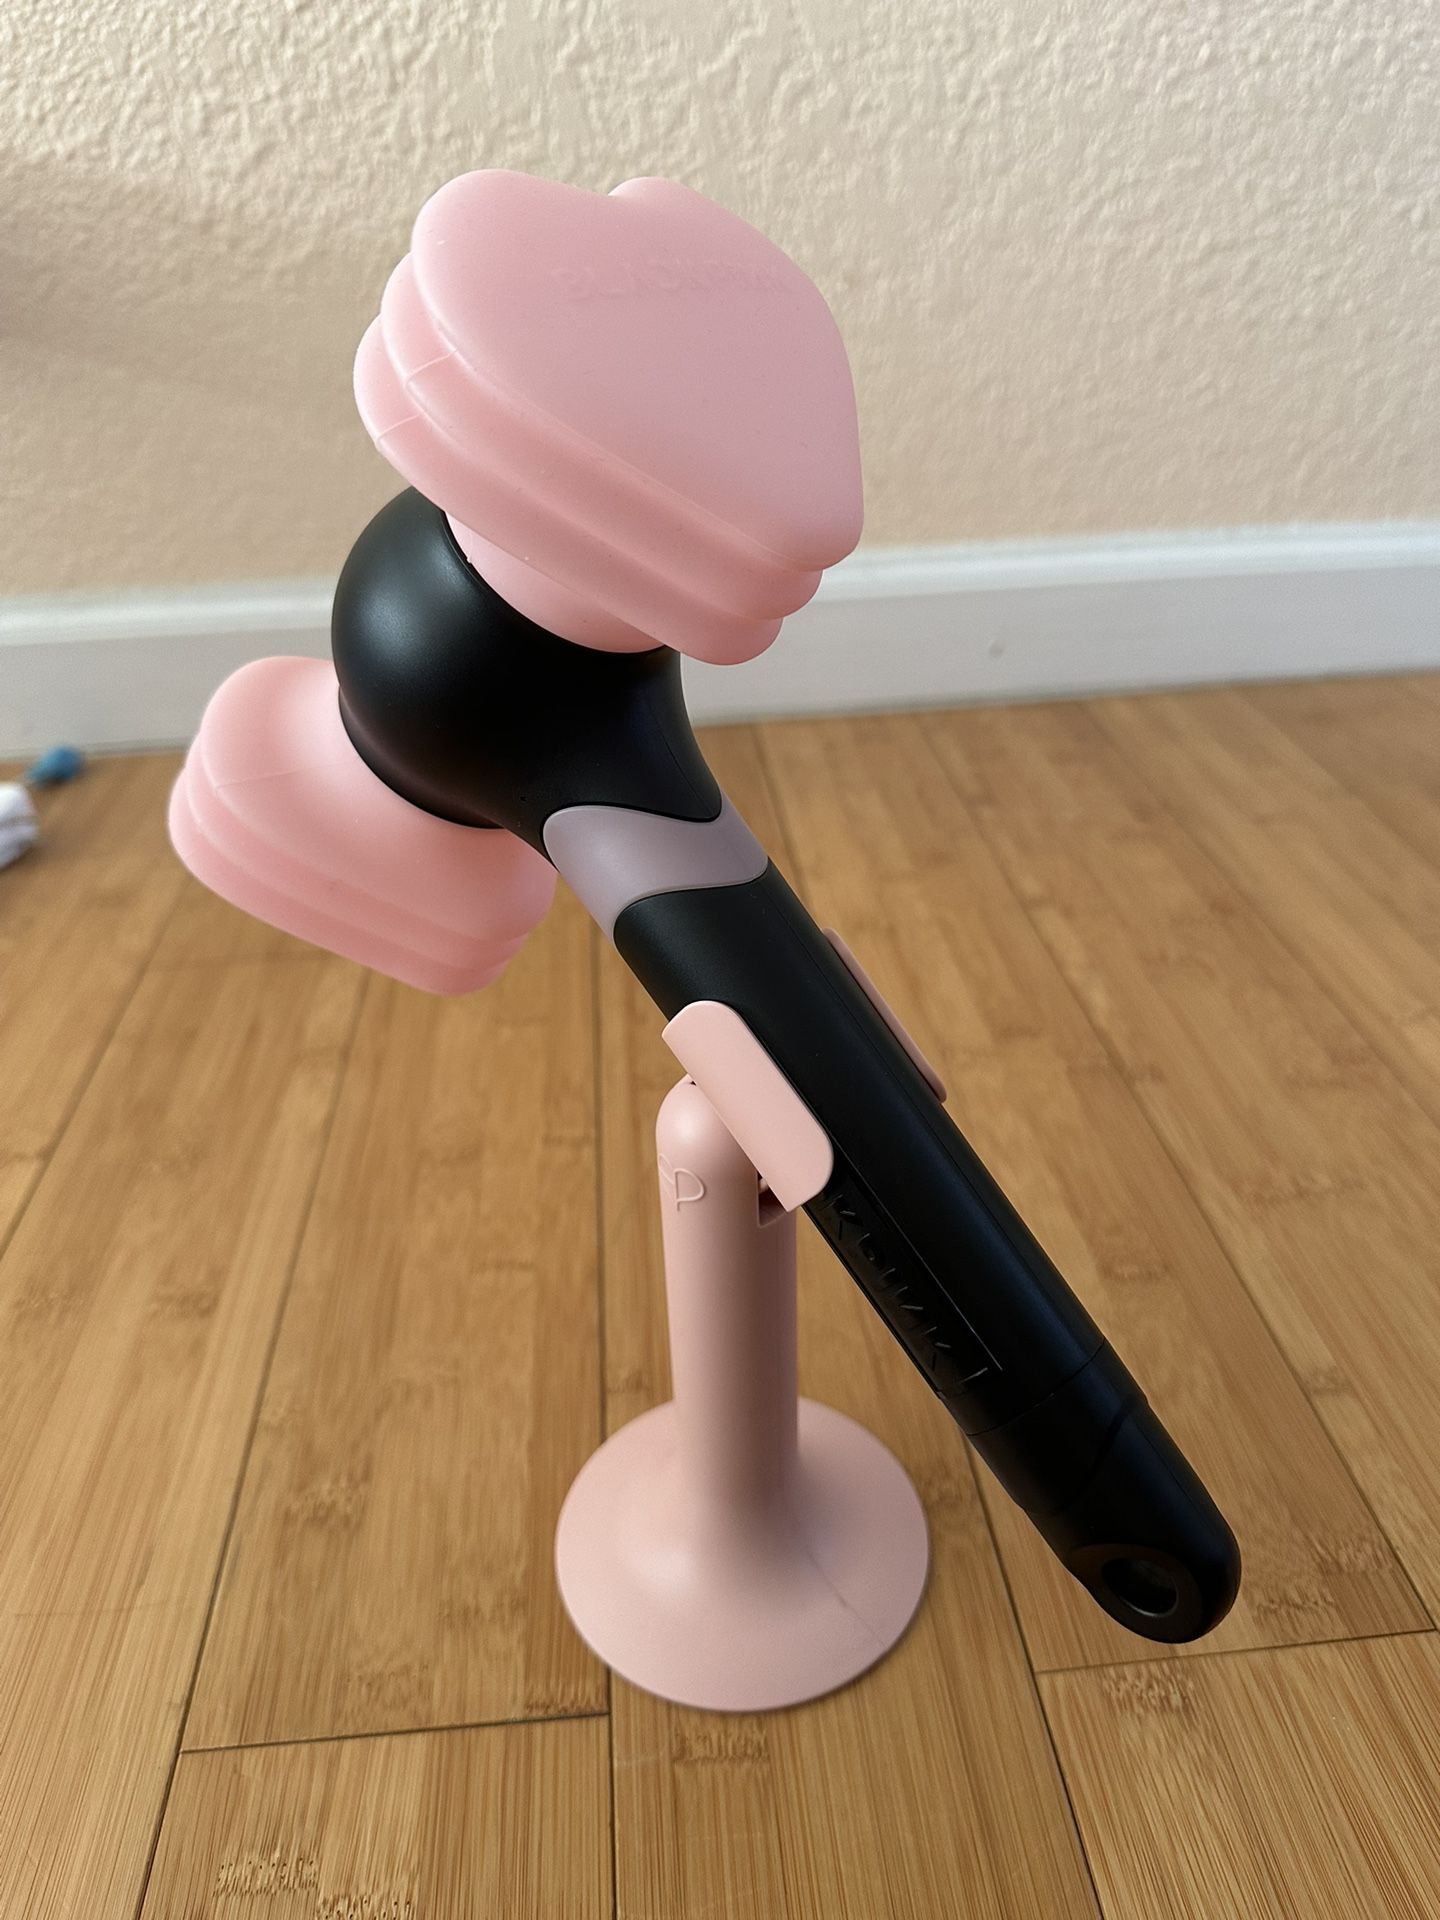 Blackpink Official Light Stick Ver2 With Stand 